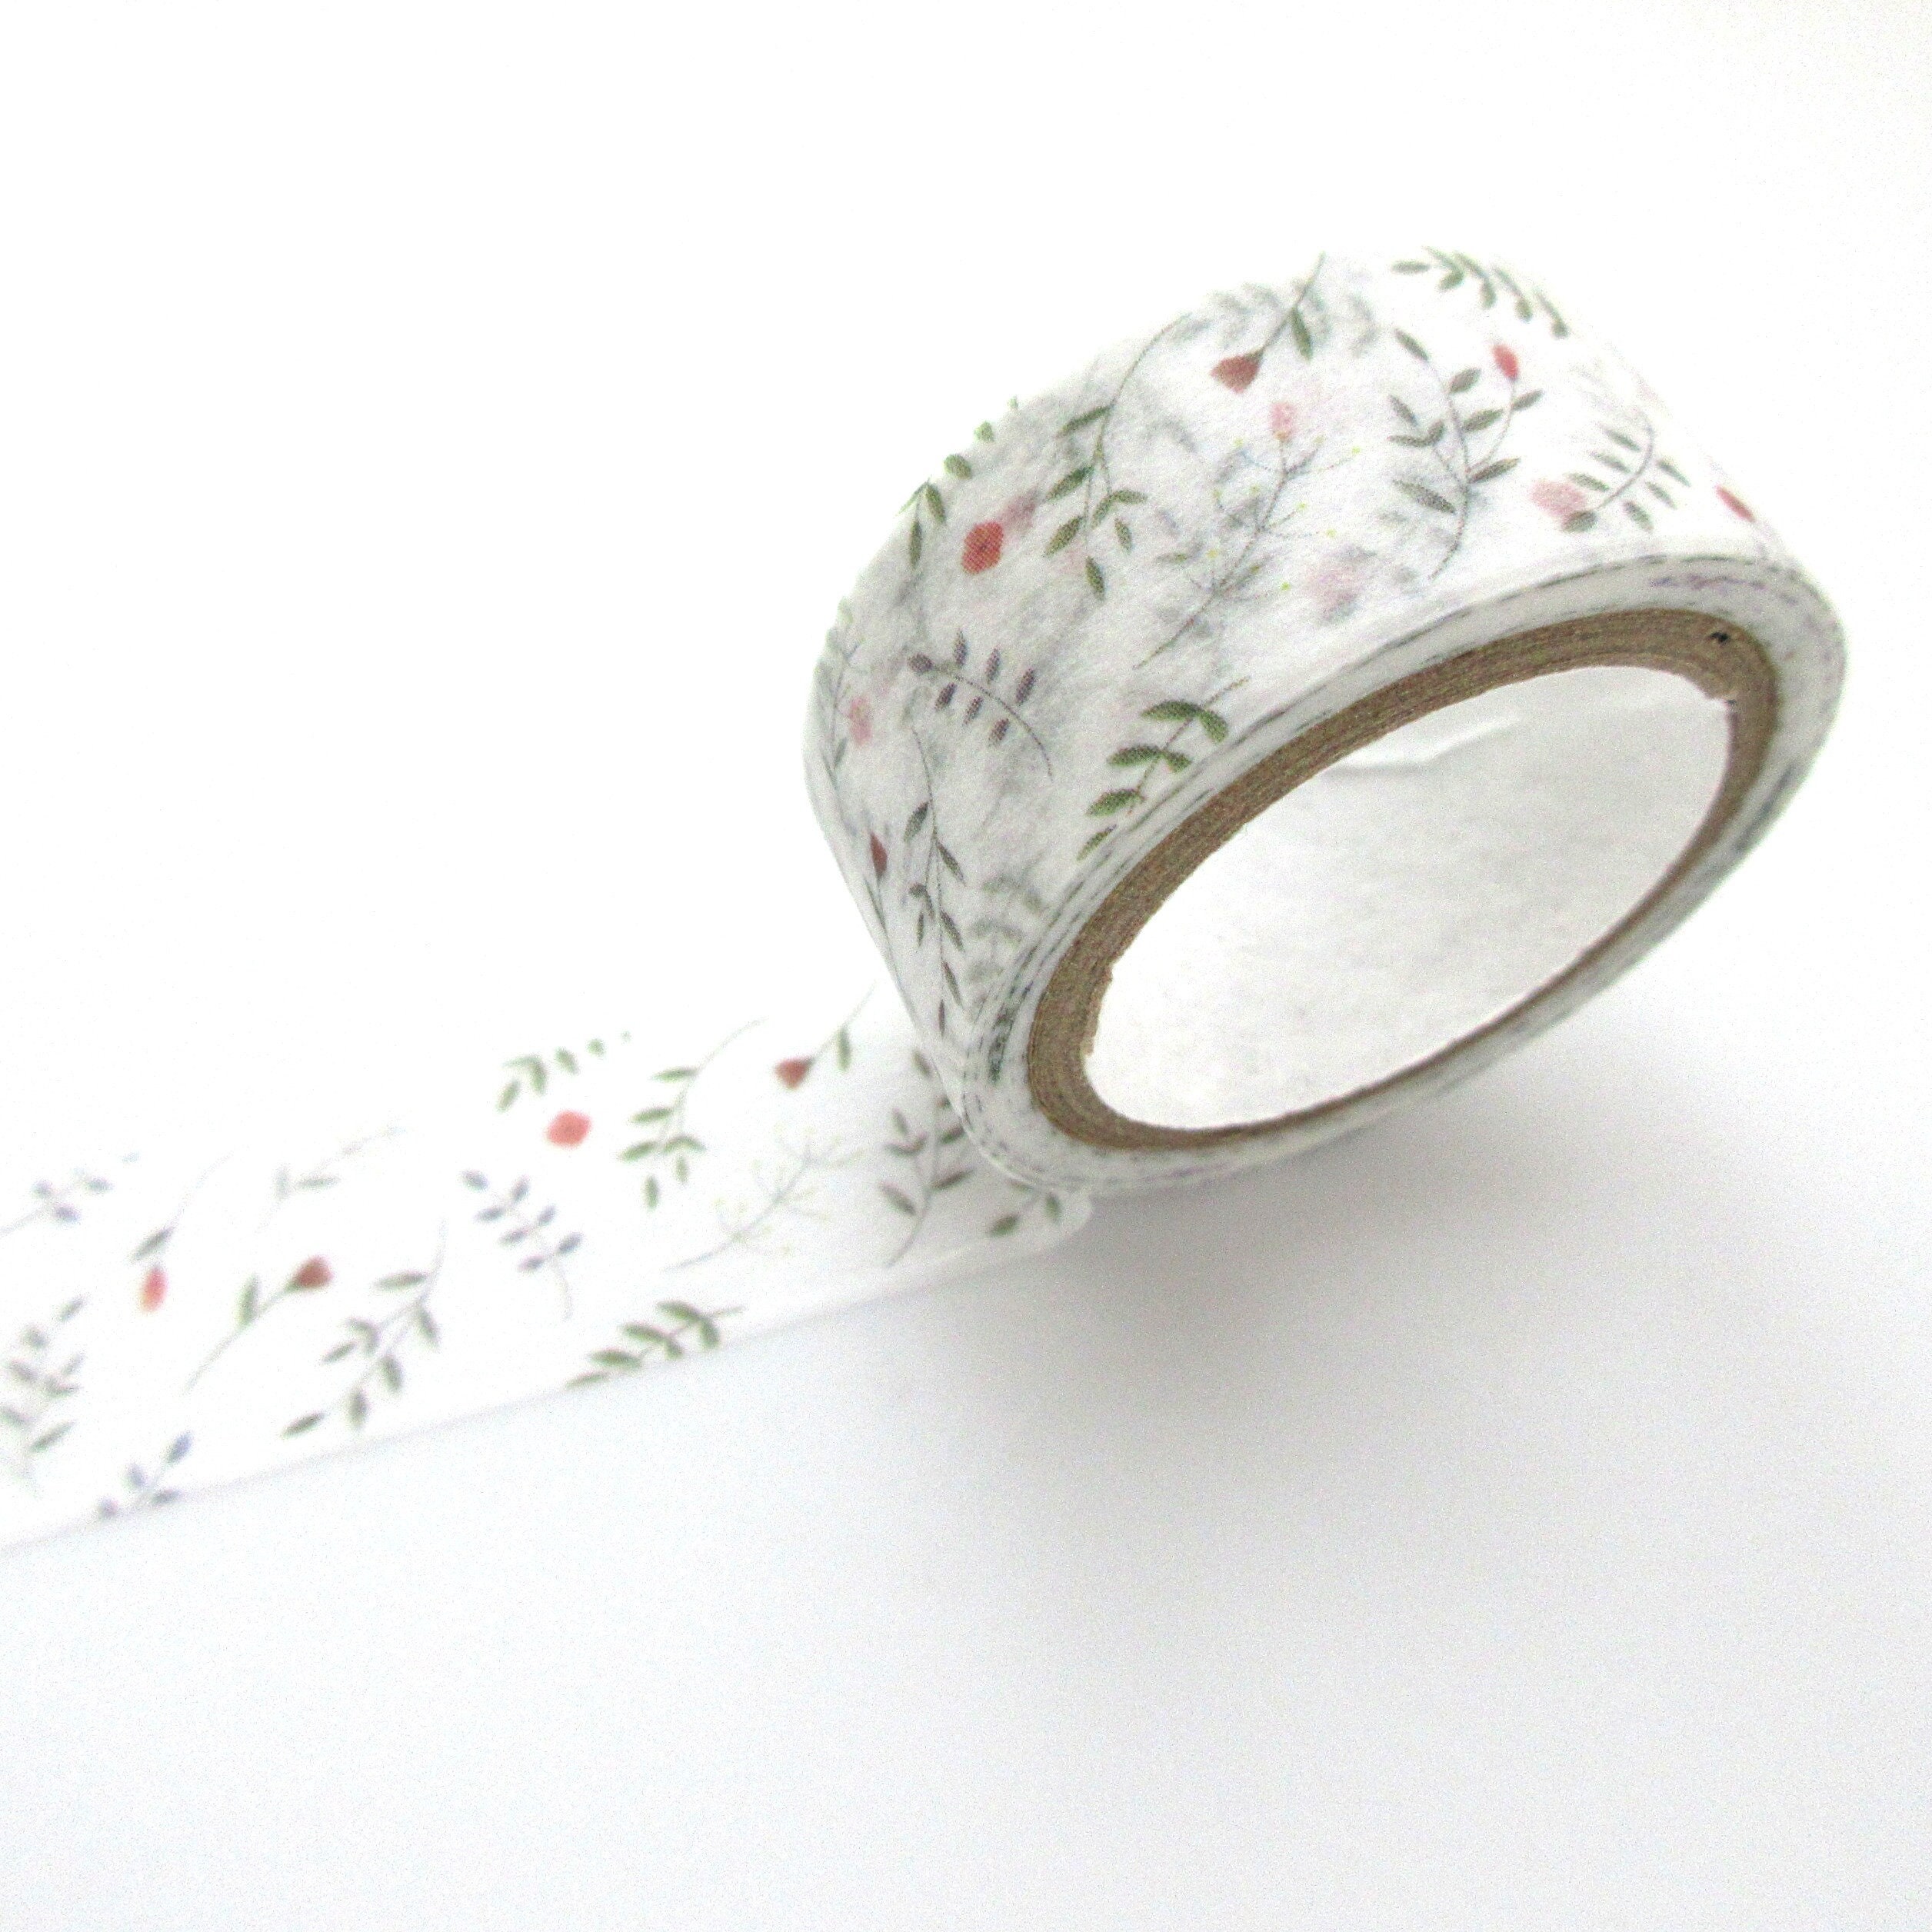 William Morris Washi Tape, Wide Tape Wall Paper 